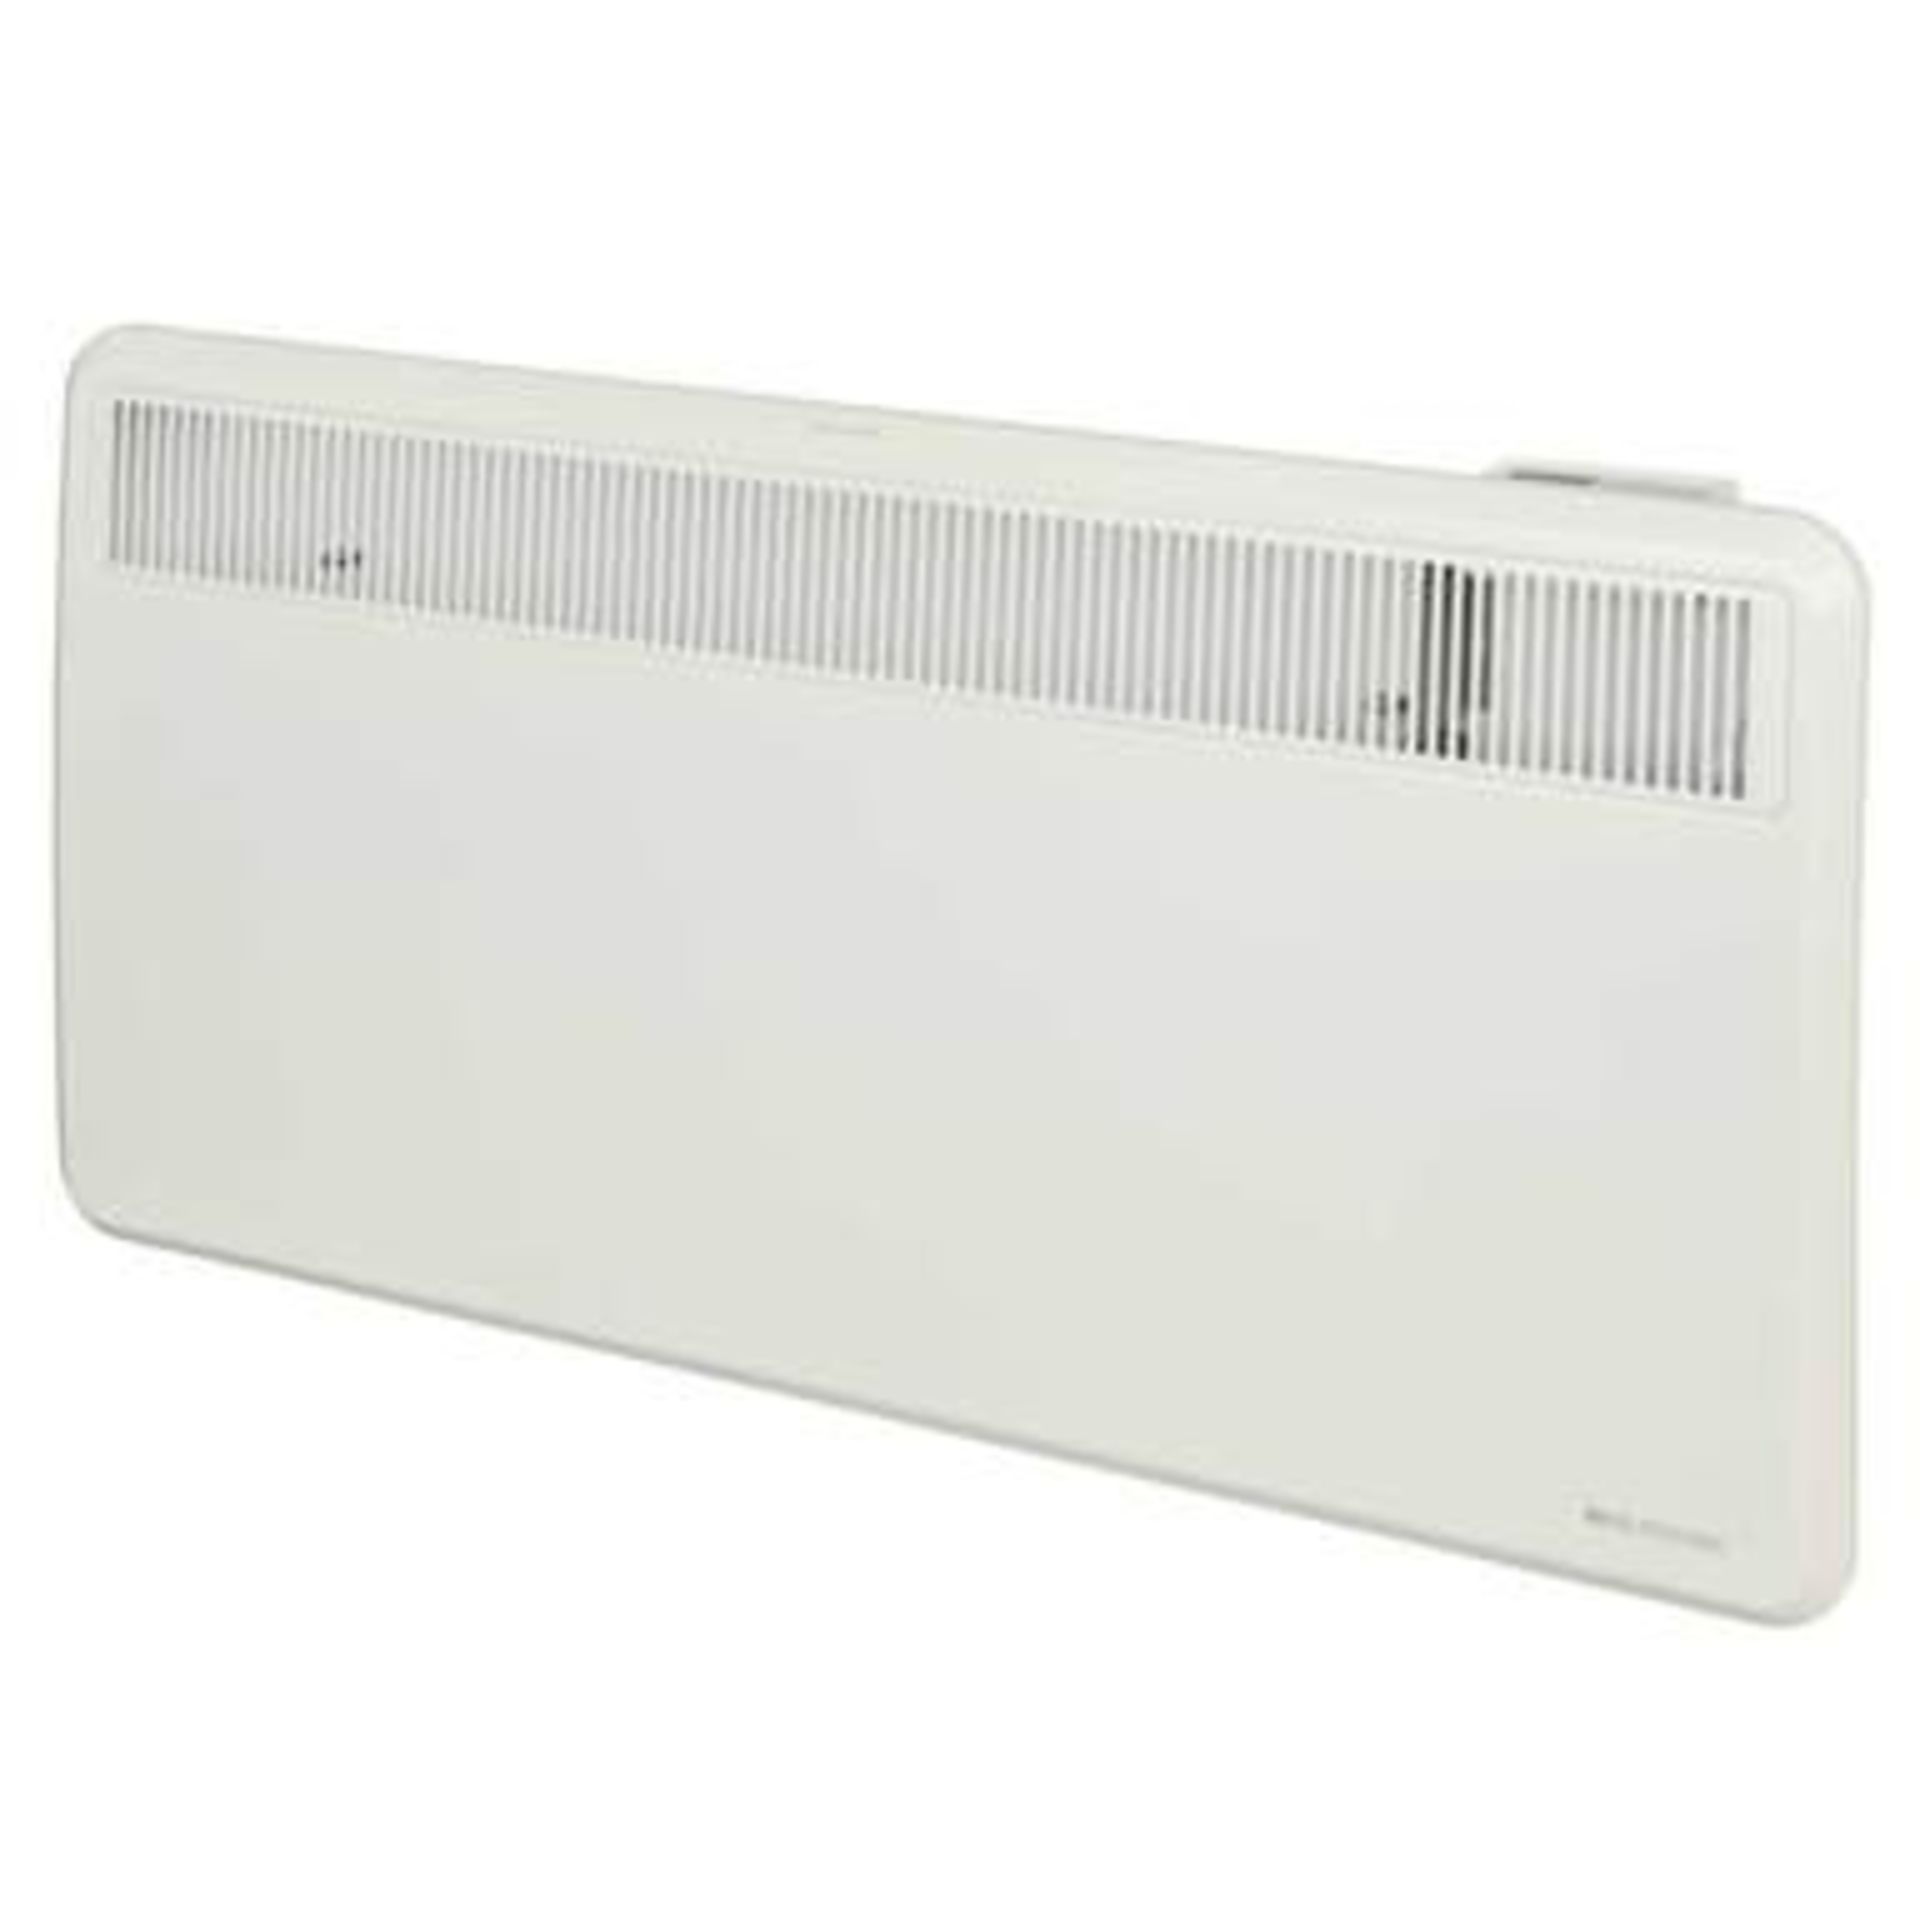 PALLET TO CONTAIN 8 x NEW BOXED Heatstore 2kW White Panel Heater with 7 Day Timer. 2000w. (